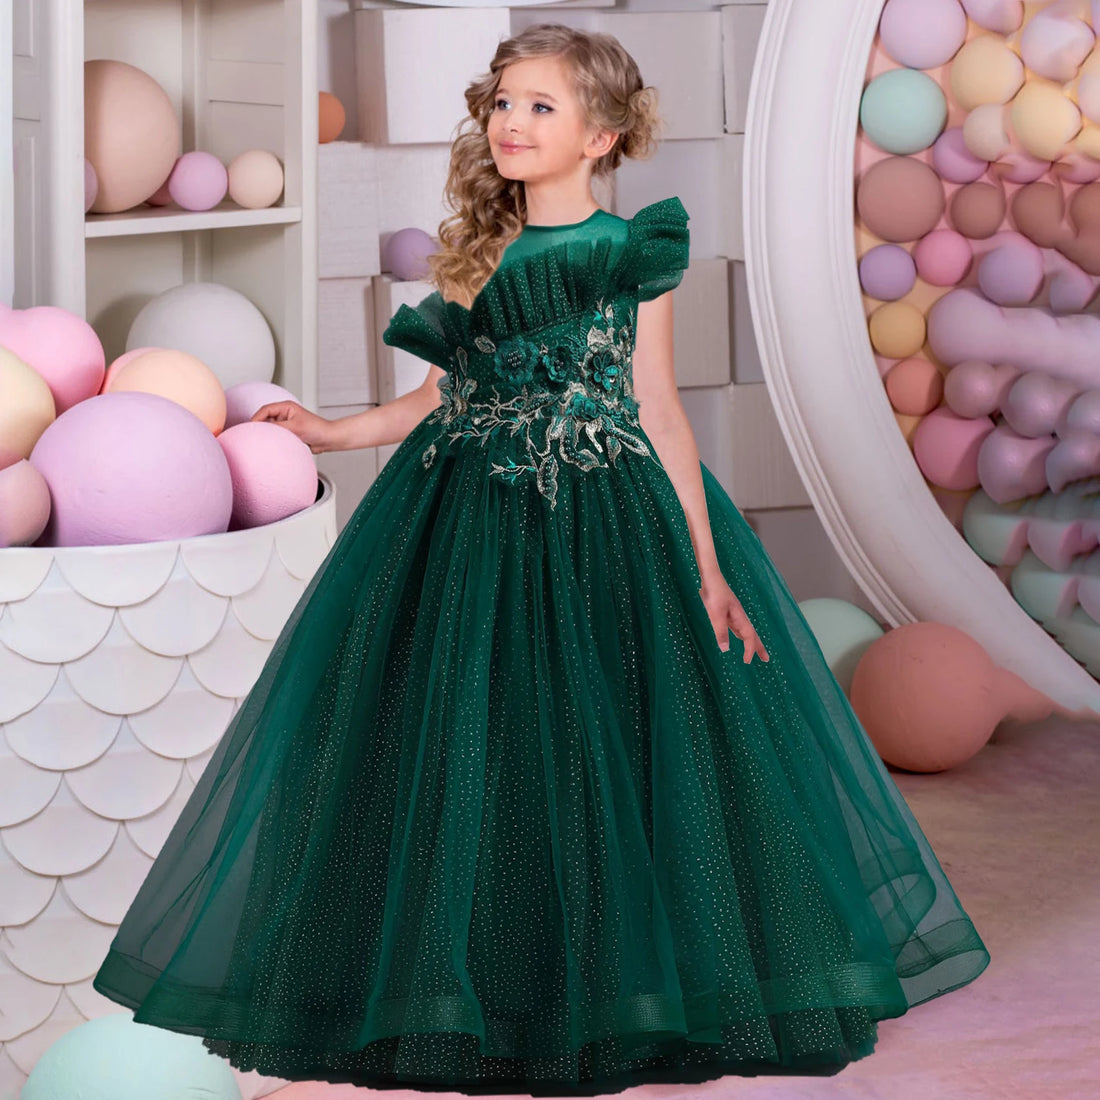 Tulle Flower Girl Dress with floral embroidery green by Baby Minaj Cruz